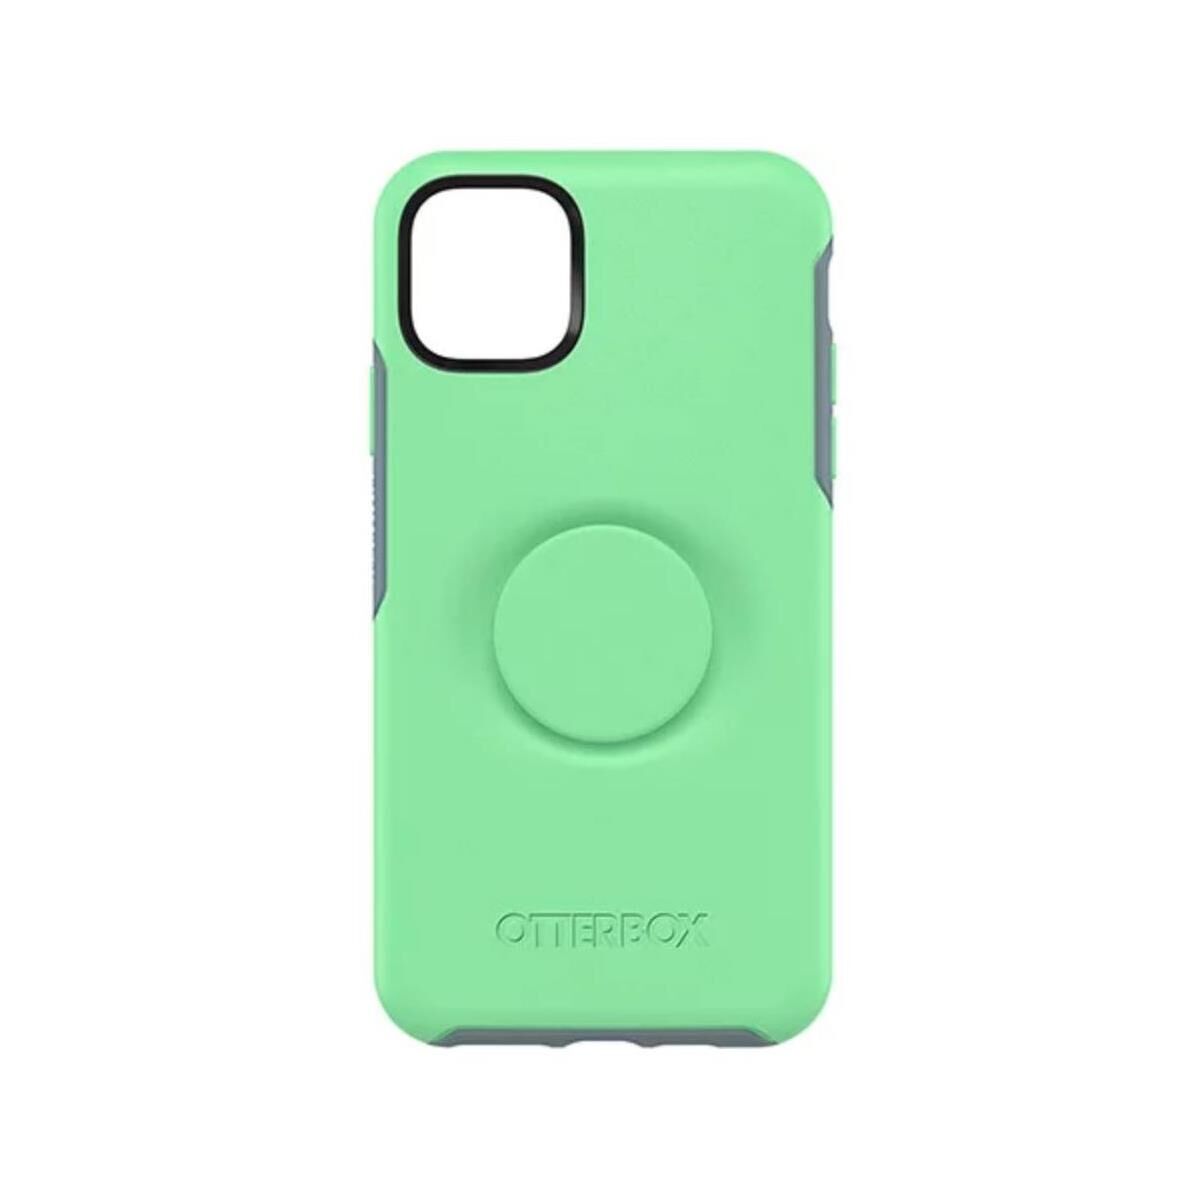 OtterBox Otter + Pop Symmetry Case for iPhone 11 Pro Max, Mint to Be